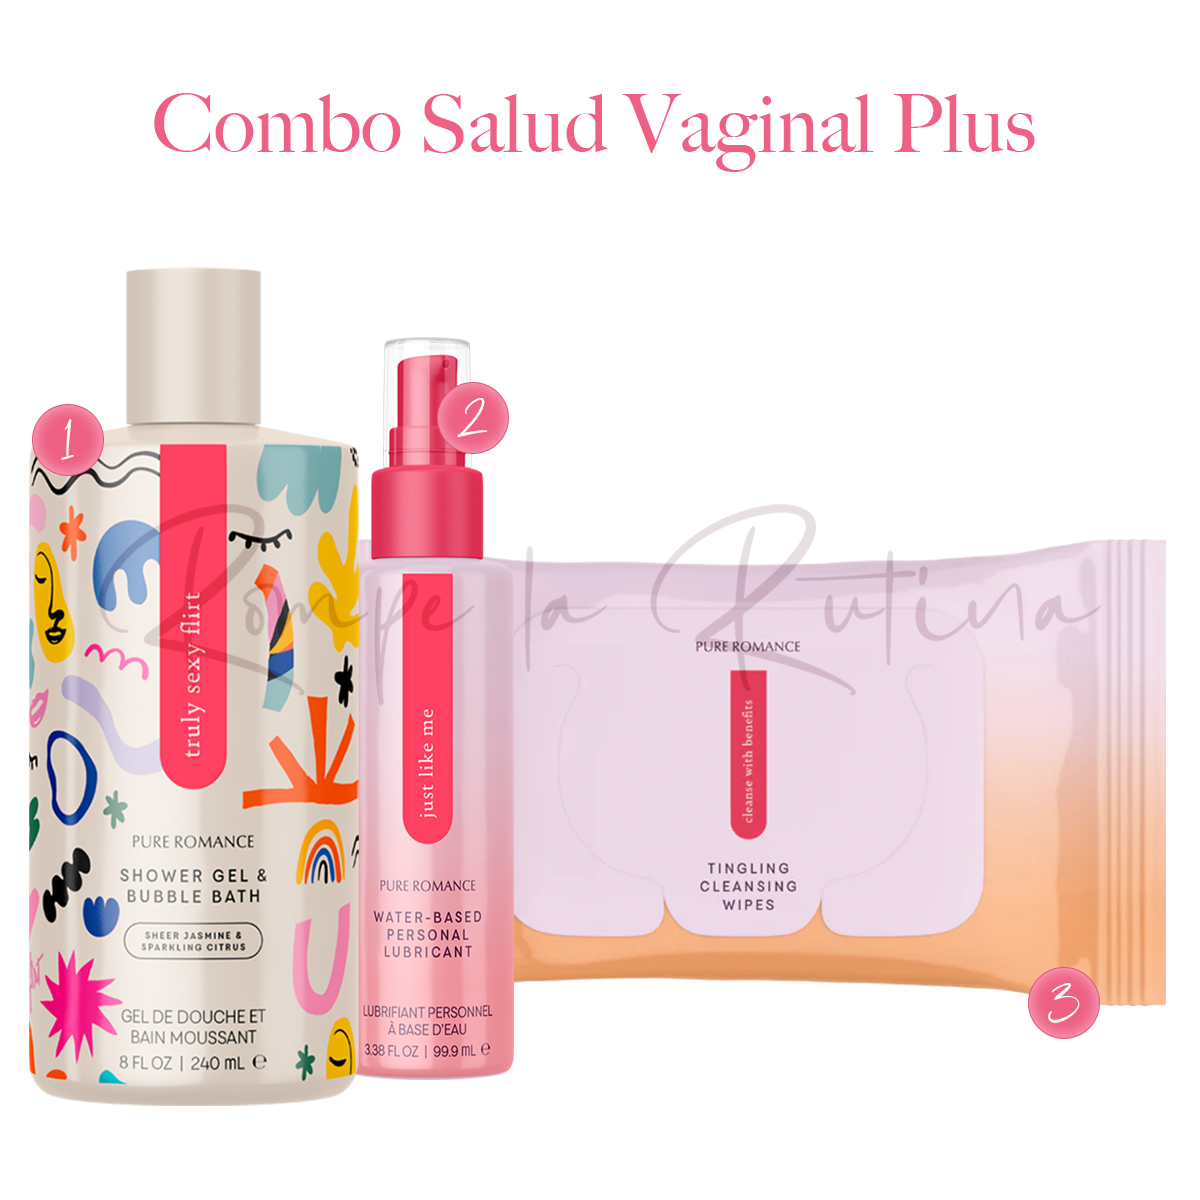 Combo Salud V-ginal Plus